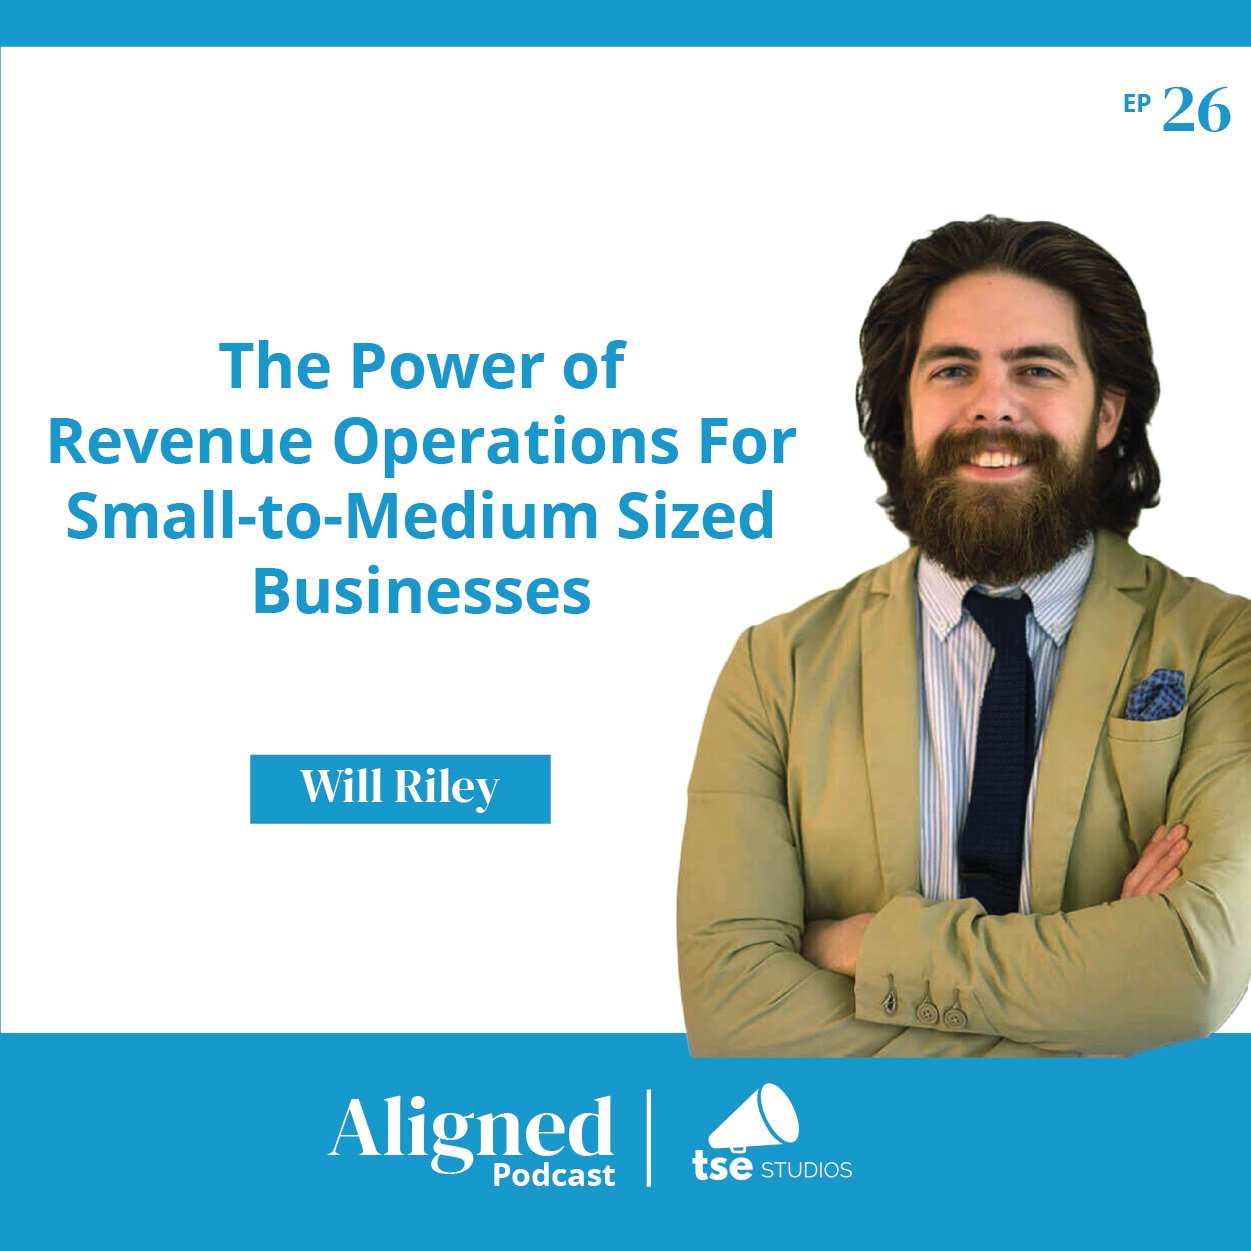 The Power of Revenue Operations For Small-to-Medium Sized Businesses